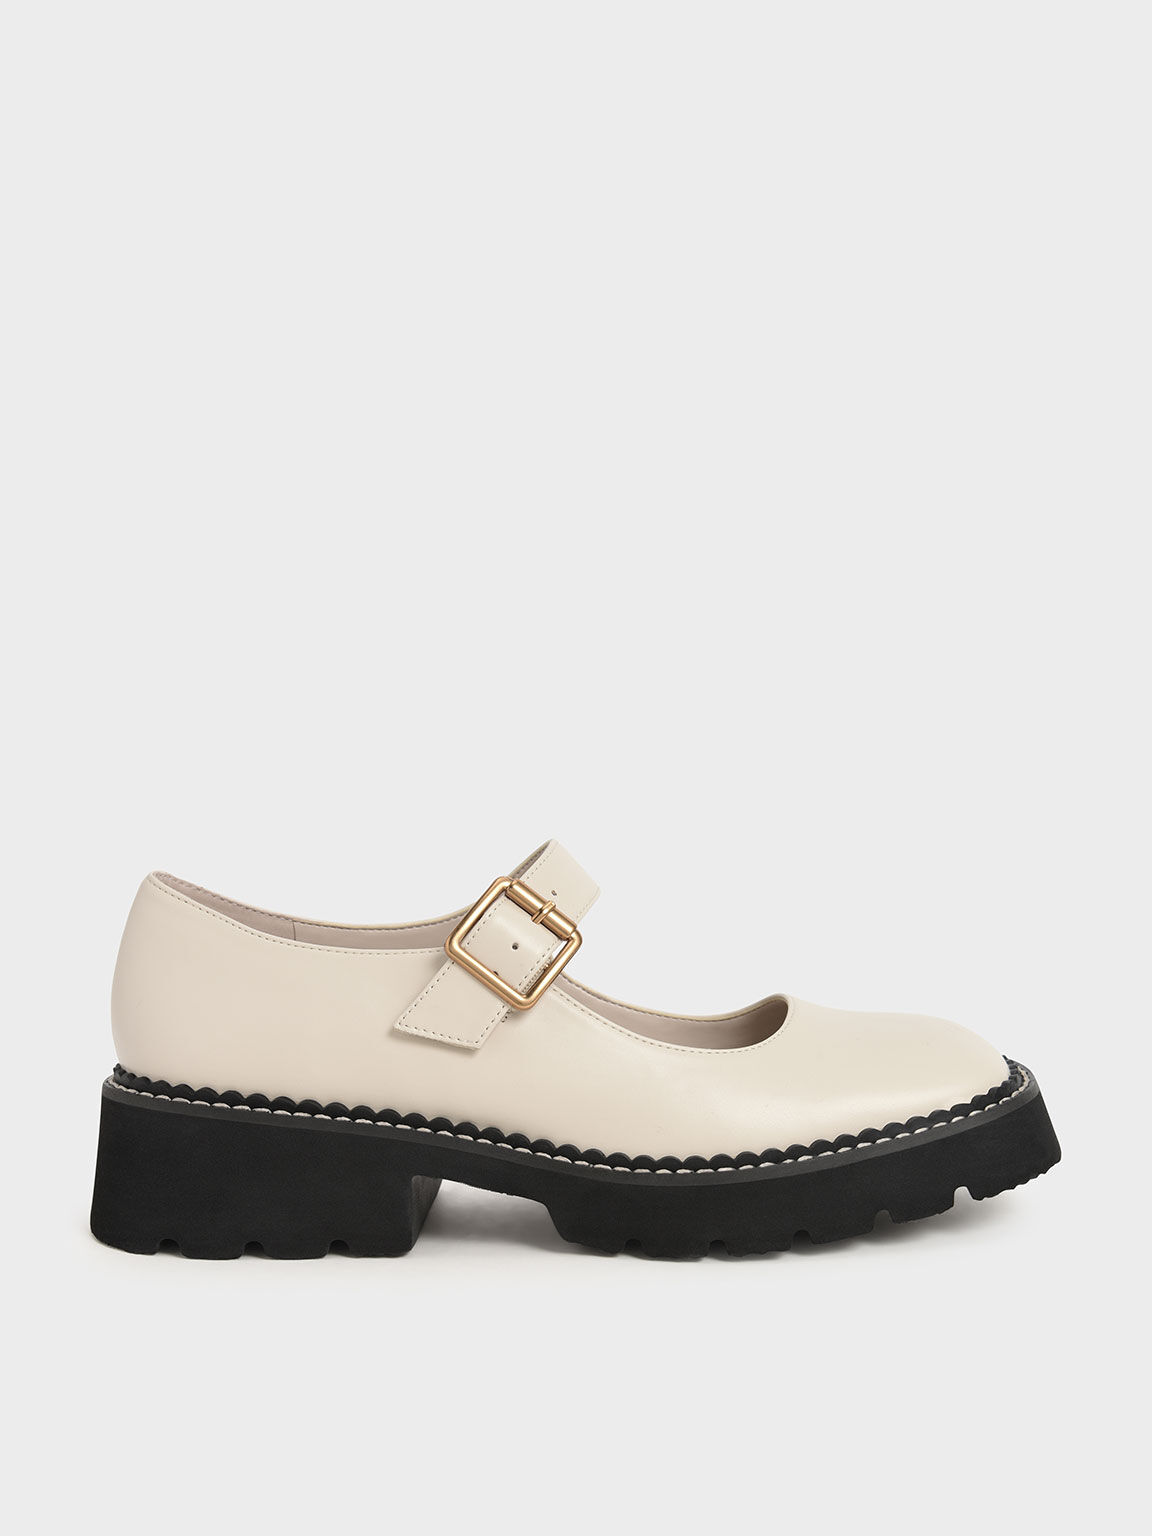 Metallic Buckle Mary Jane Shoes, Chalk, hi-res